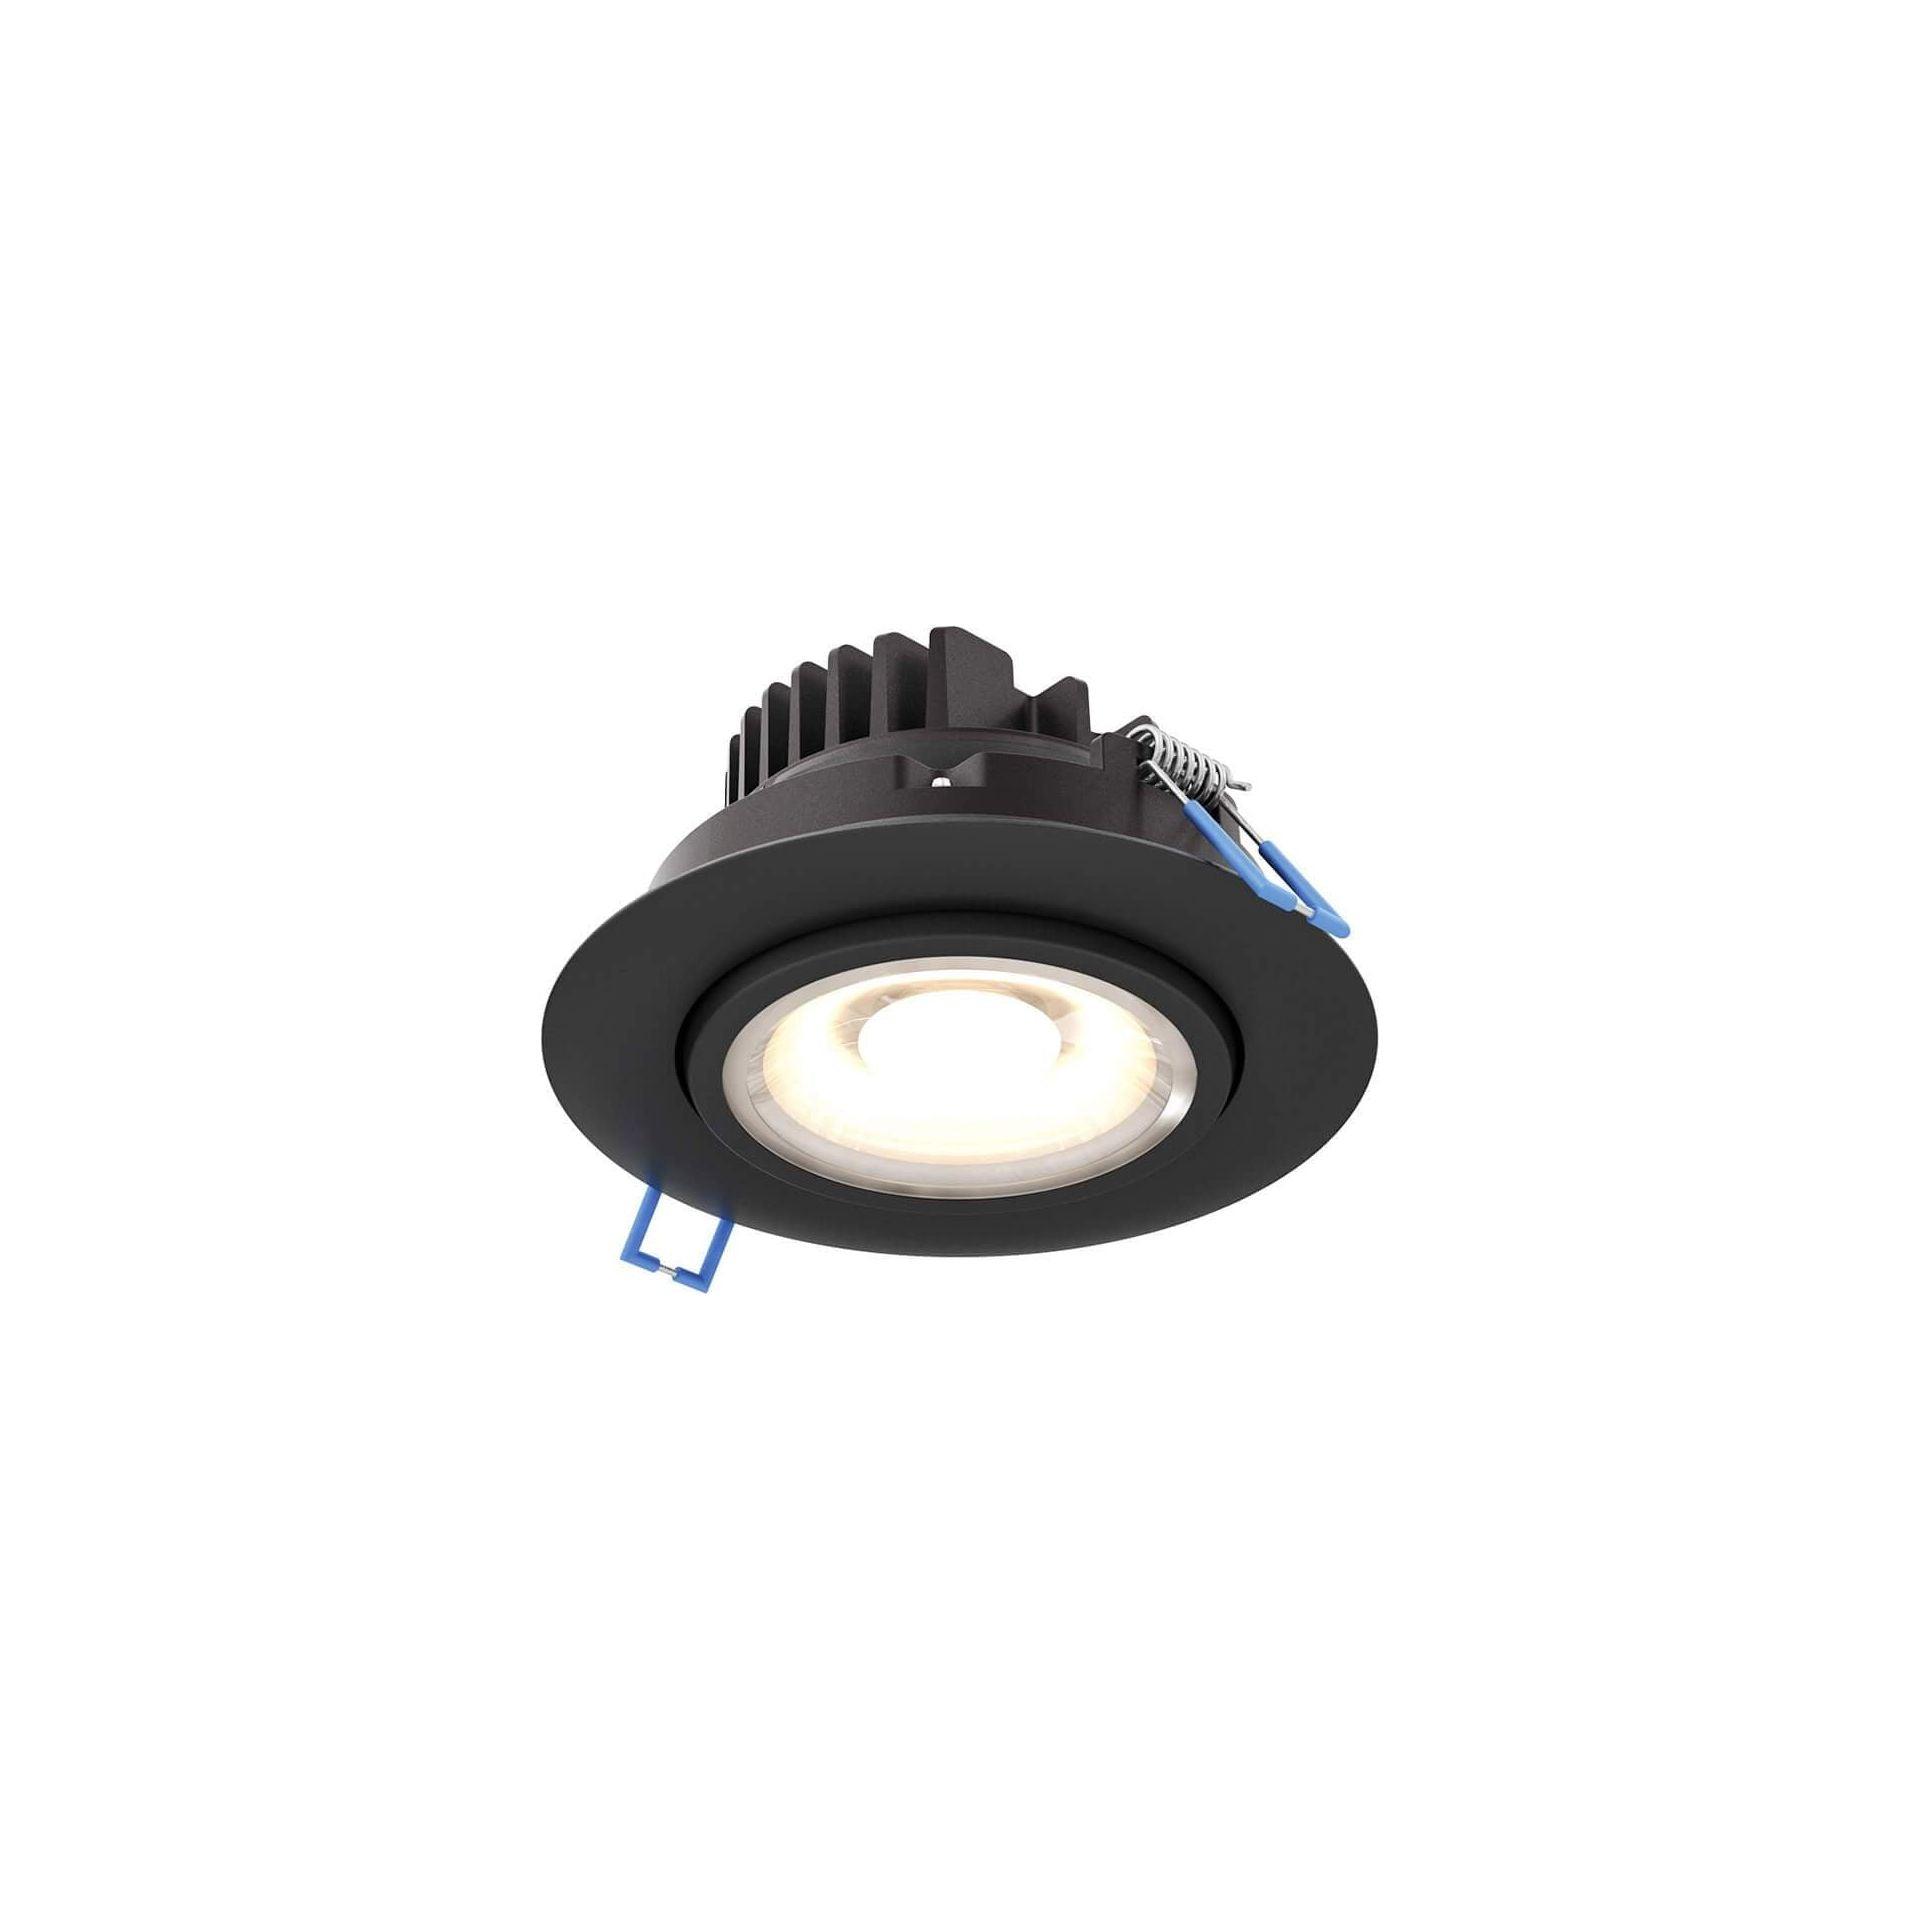 DALS - Round Recessed Led Gimbal Light - Lights Canada